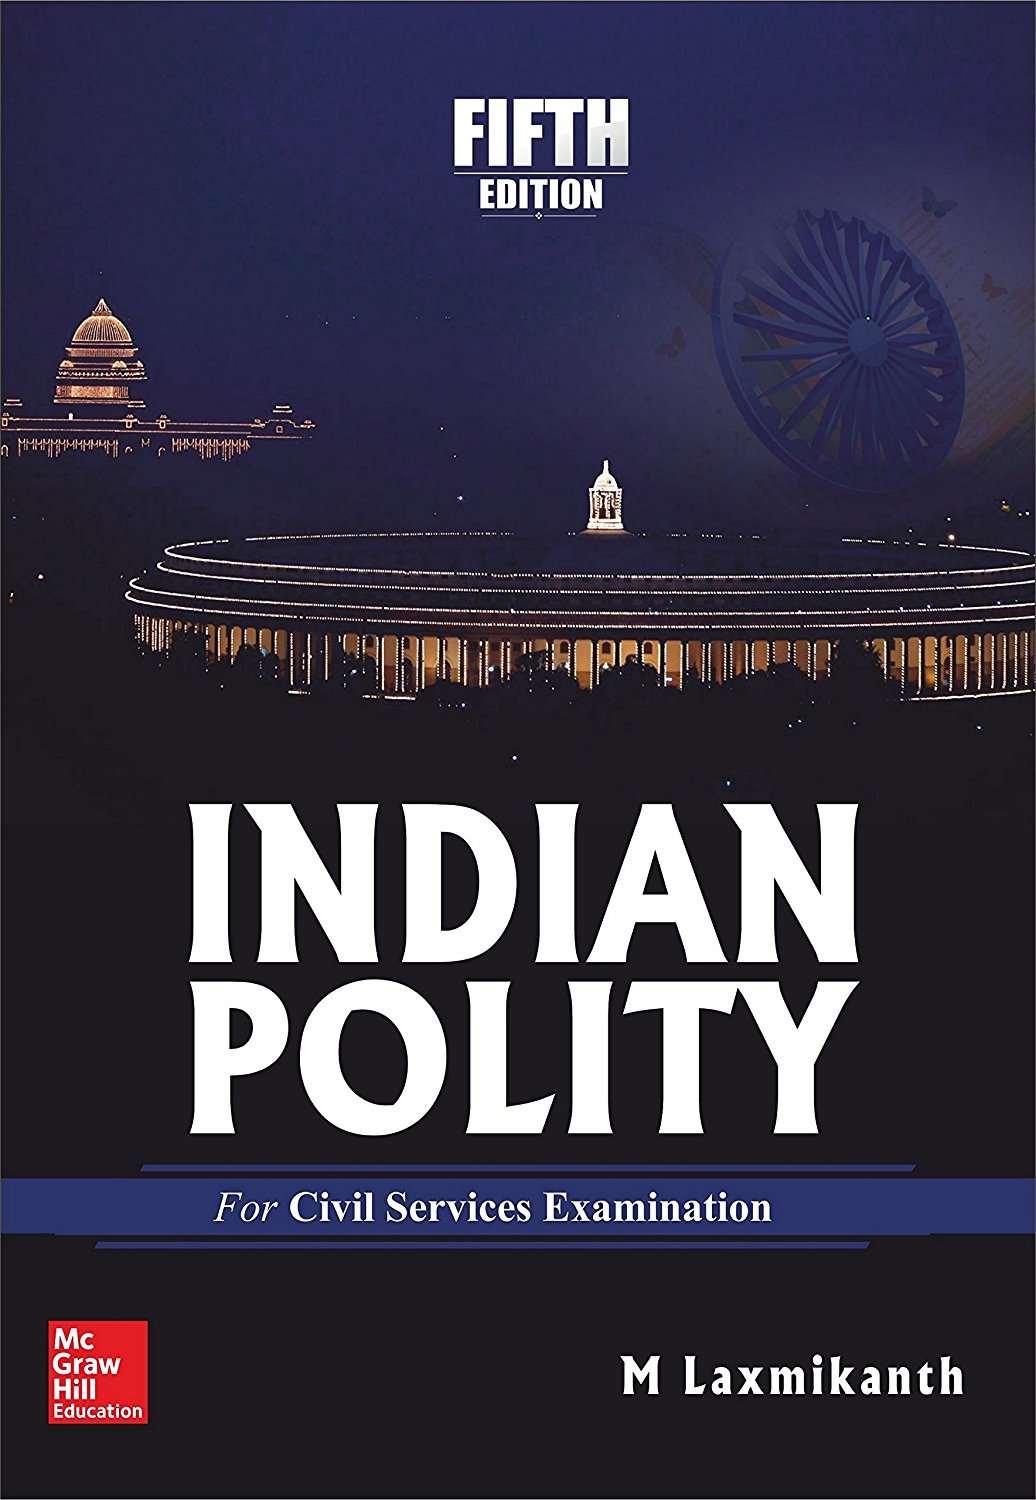 Buy Indian Polity Th Edition M Laxmikanth Online From Shopclues